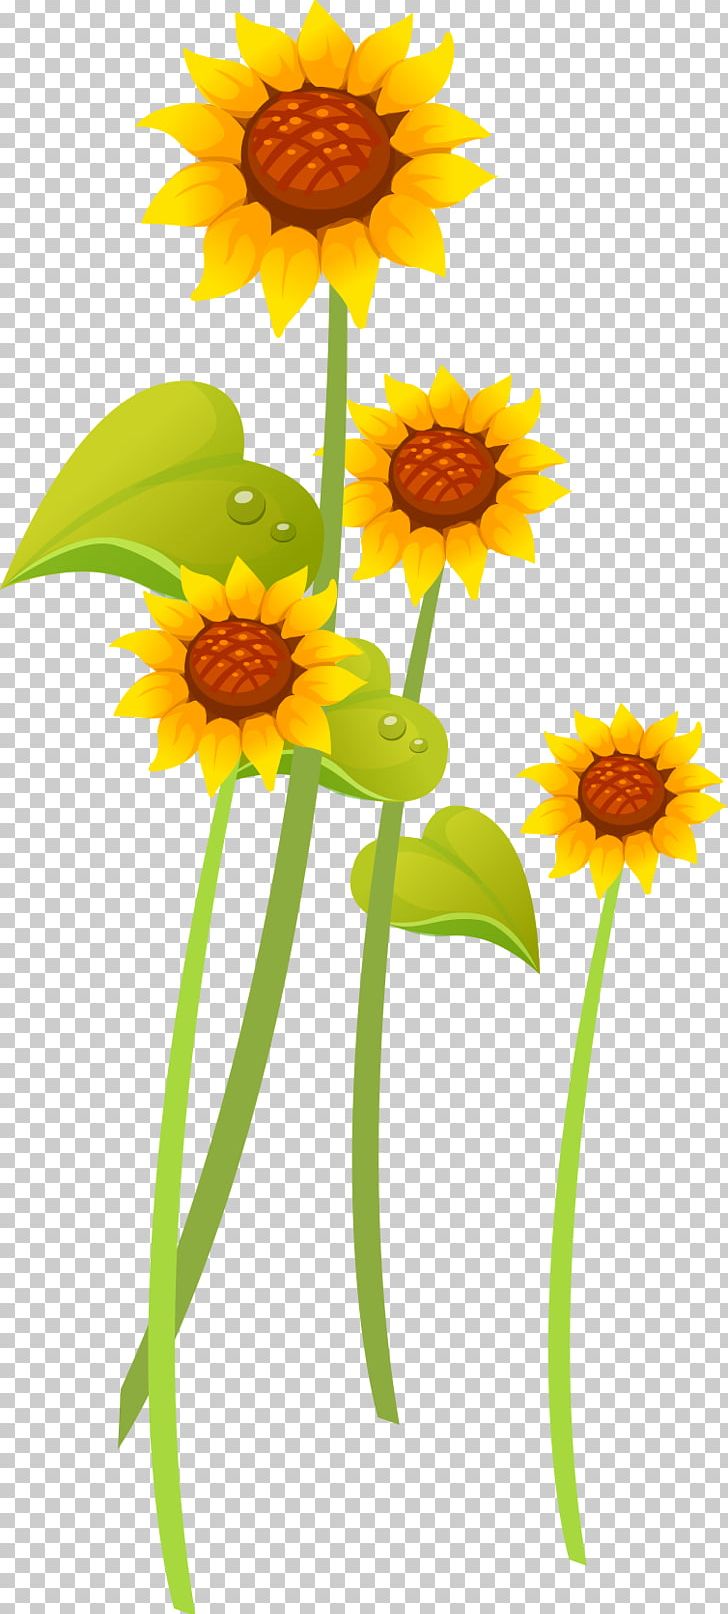 Common Sunflower PNG, Clipart, Adobe Illustrator, Cartoon, Cartoon Sunflower, Cham, Daisy Family Free PNG Download